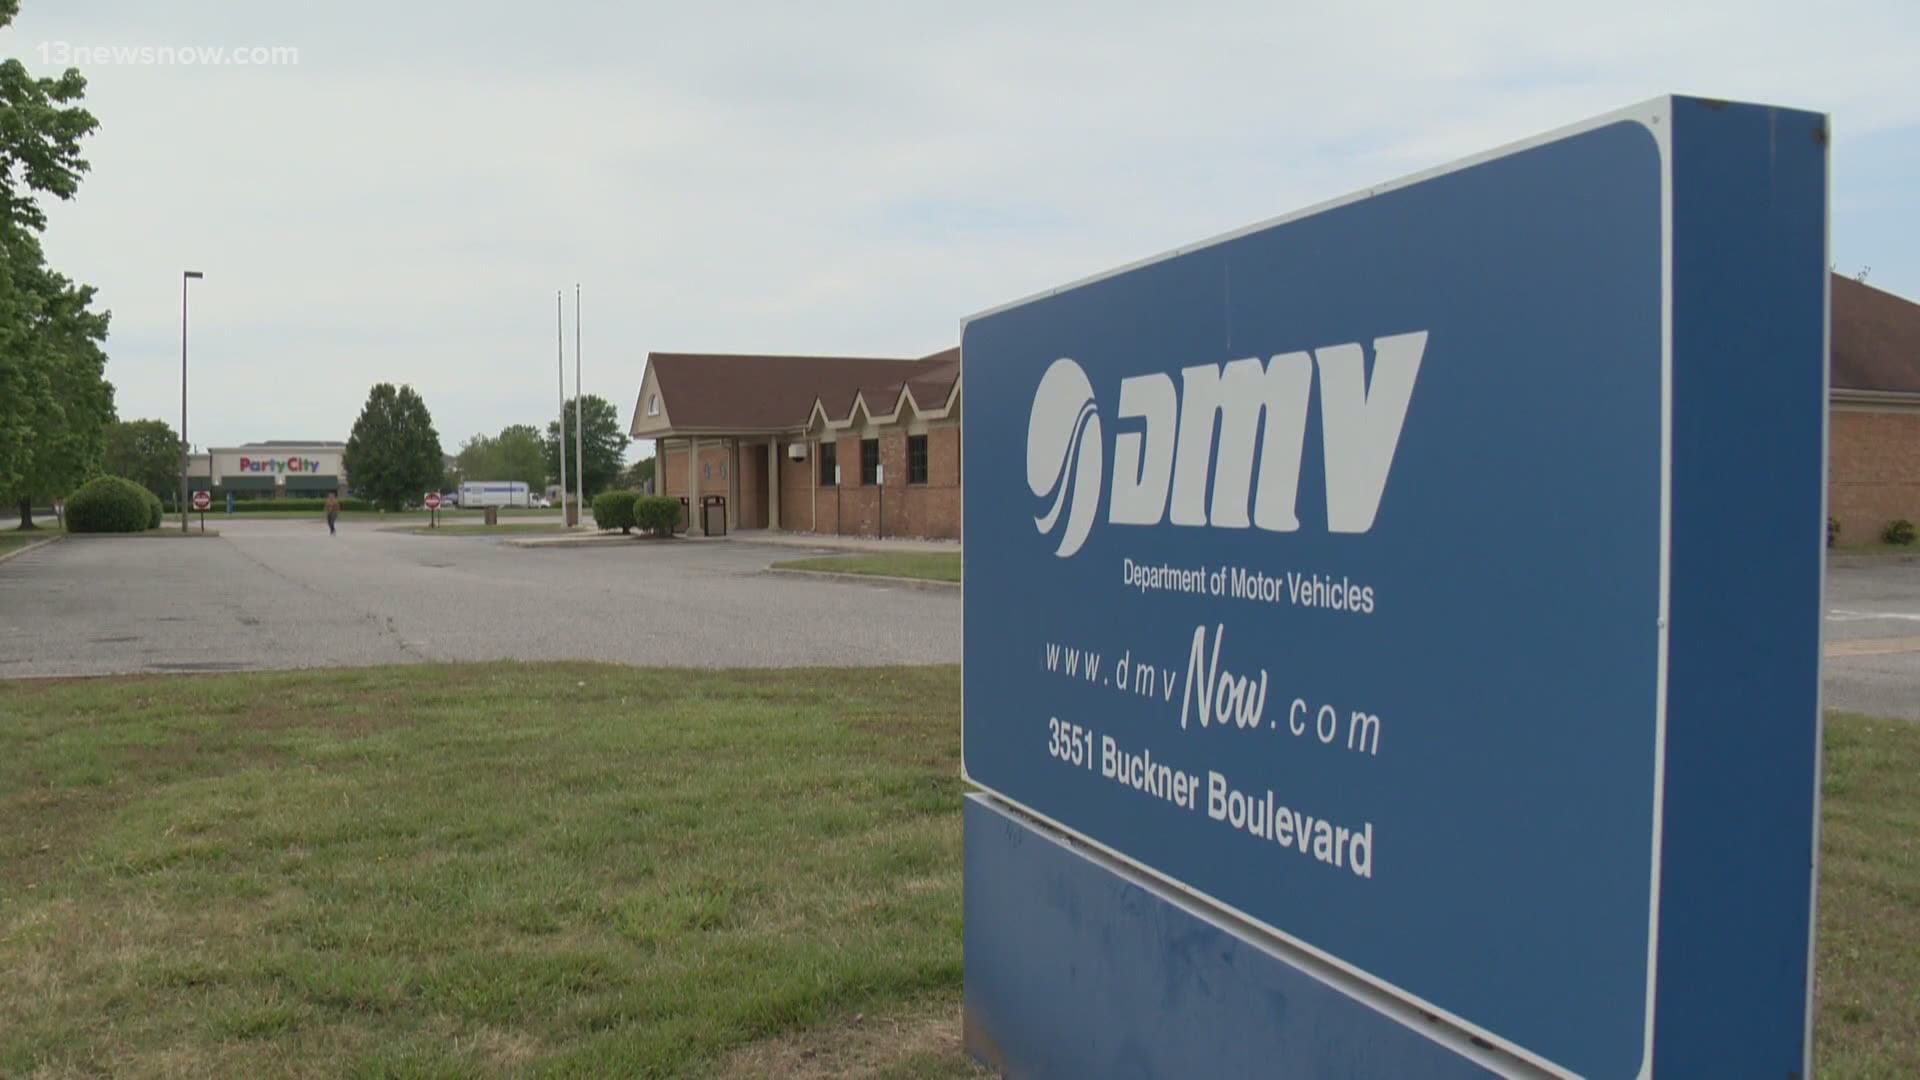 Brandy Brubaker, a spokeswoman for the Virginia DMV, said the organization is working to help open more appointments for customers who need them.